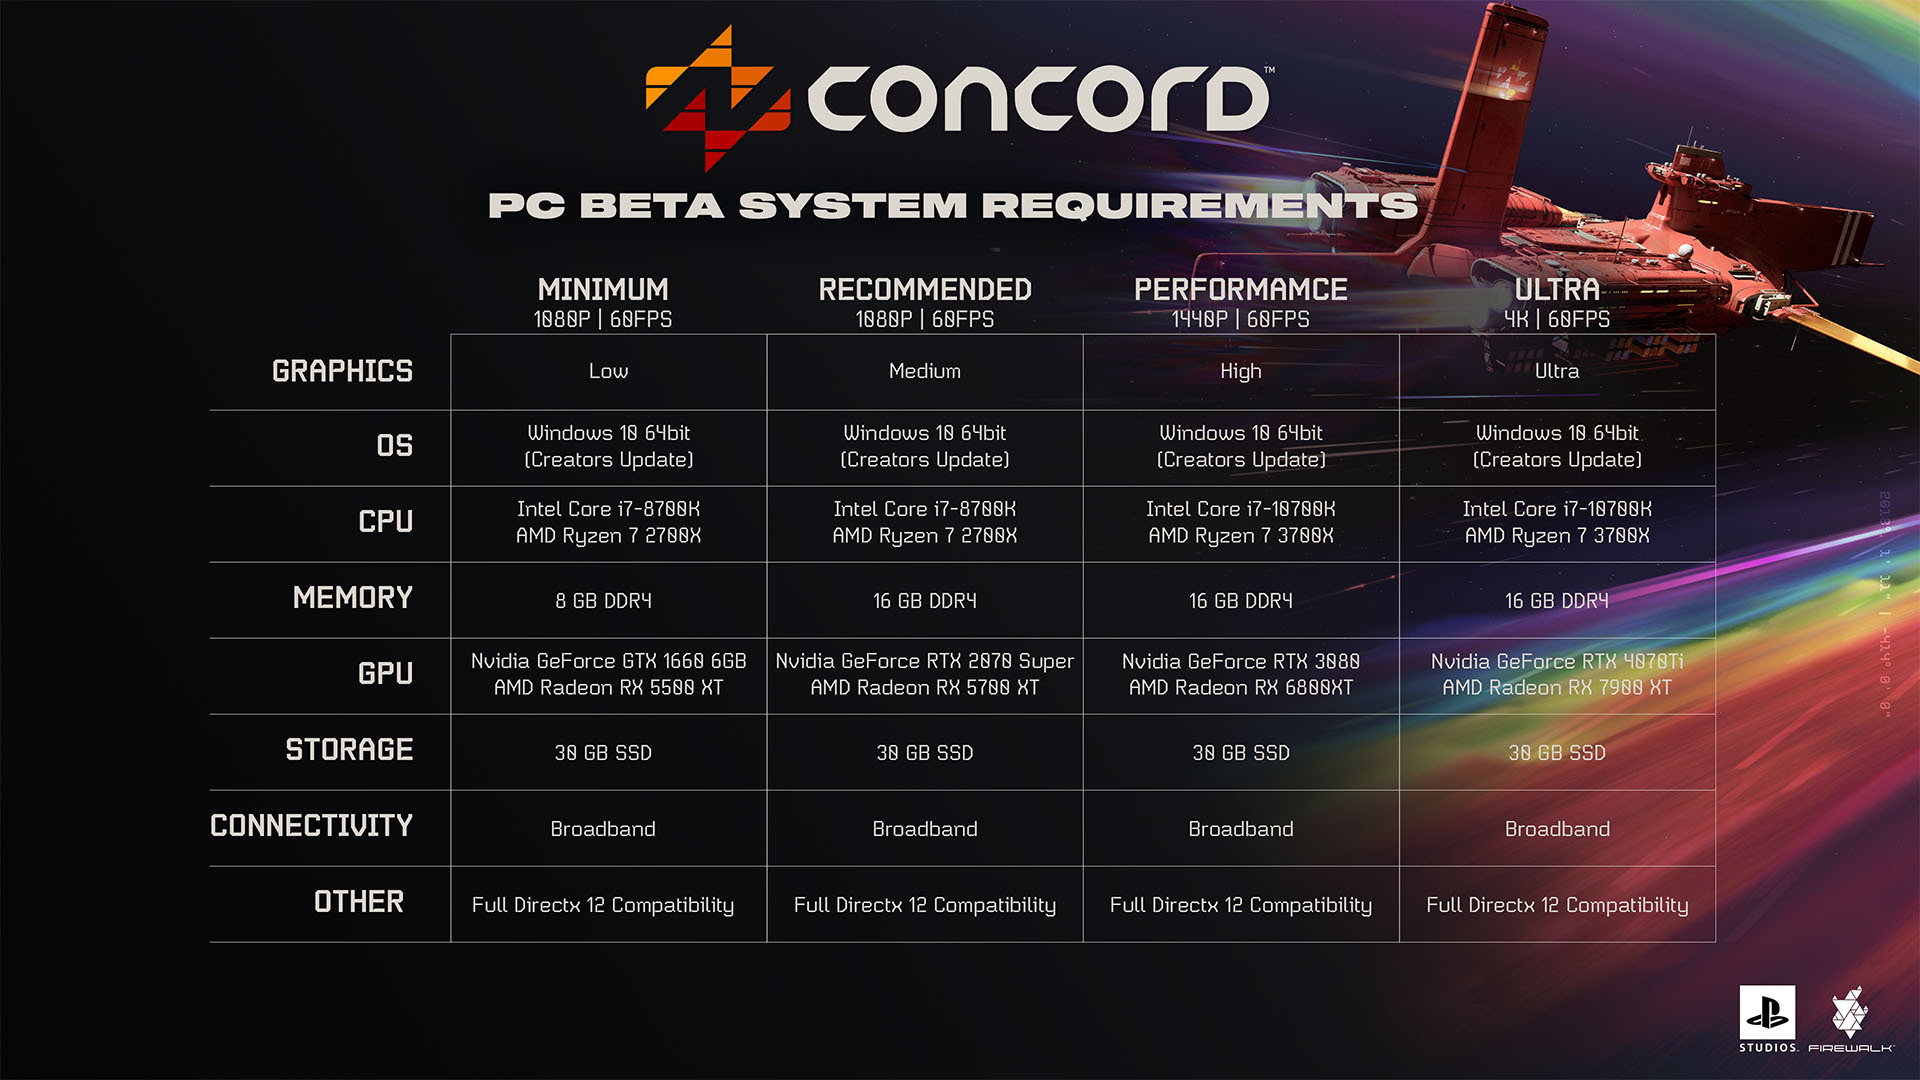 Concord PC beta test system requirements